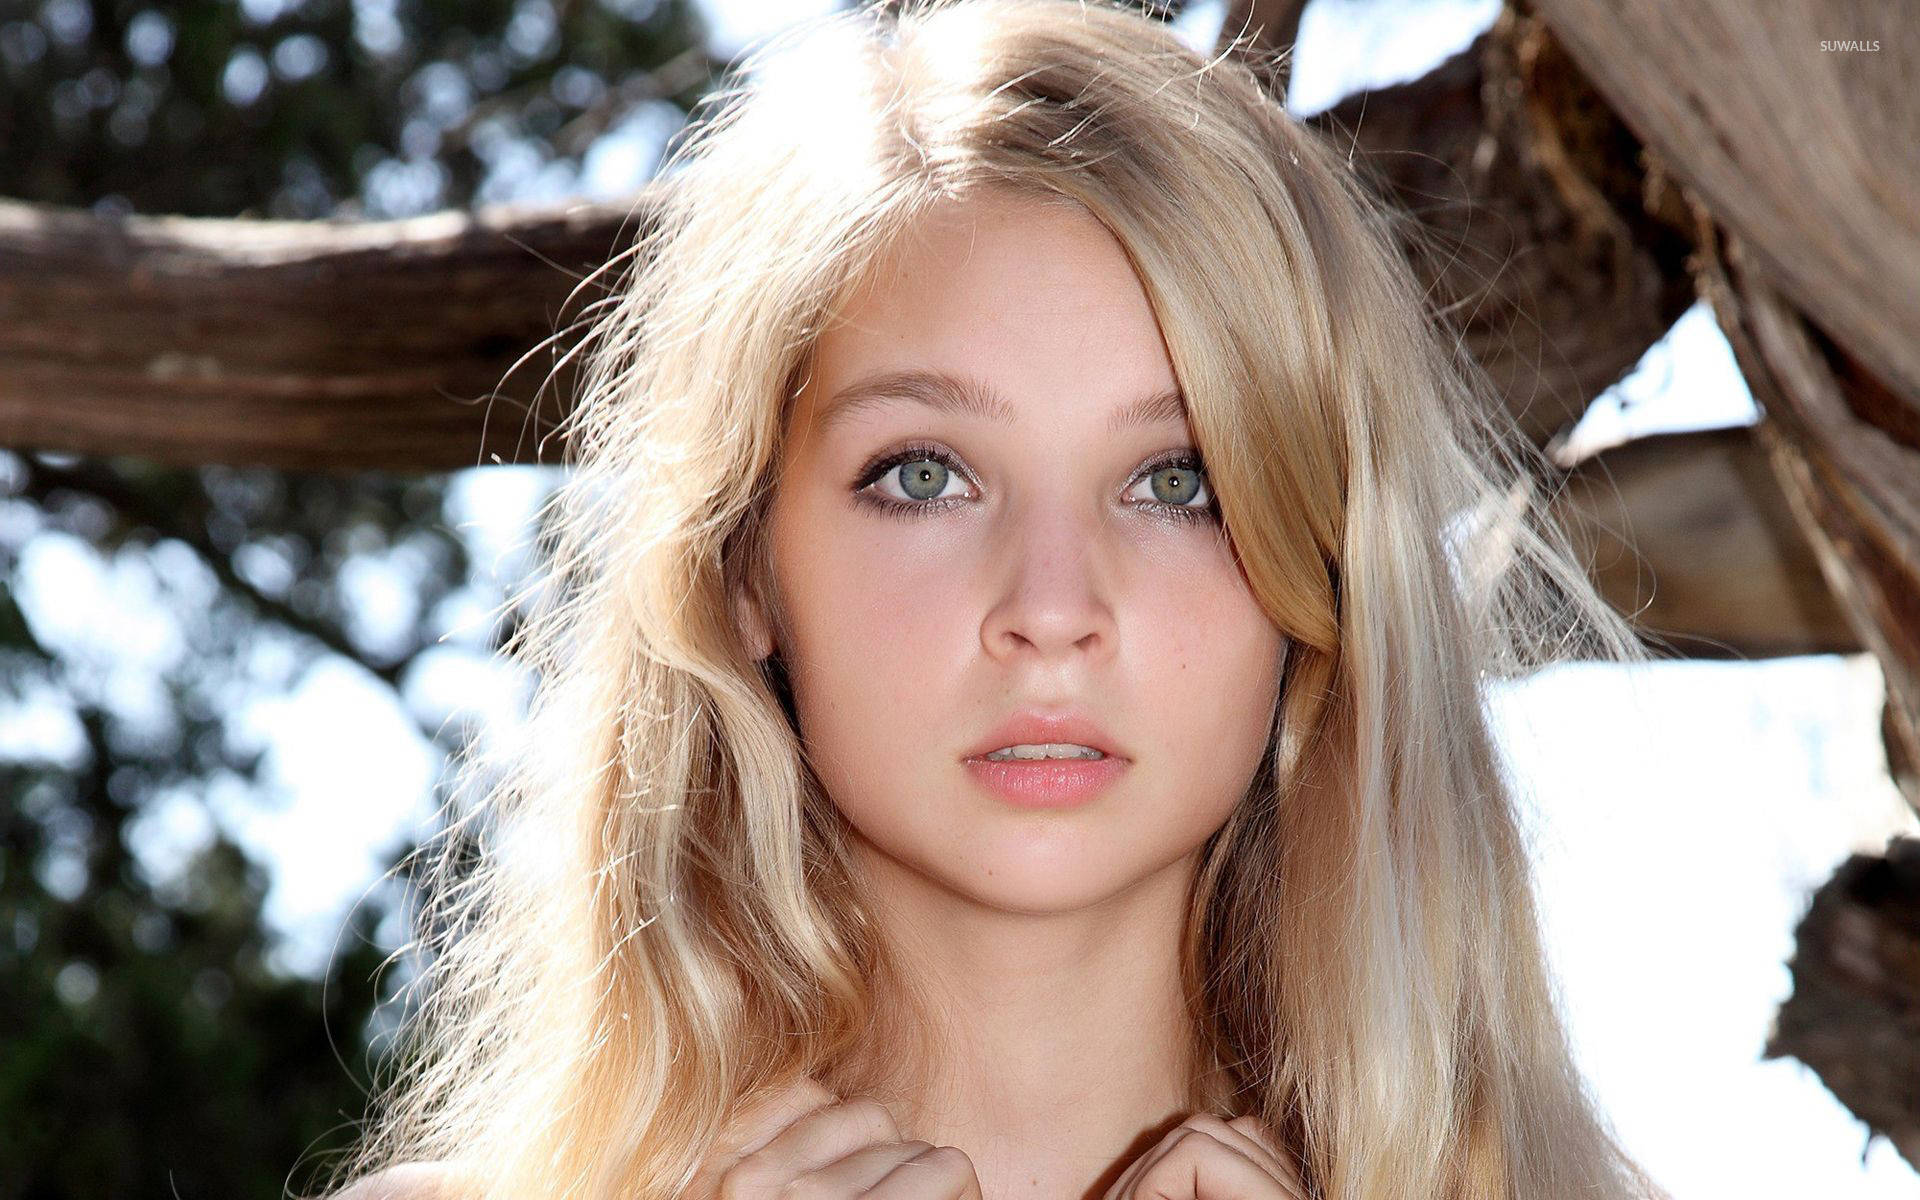 1. Long blonde hair: 20 beautiful styles to try - wide 1